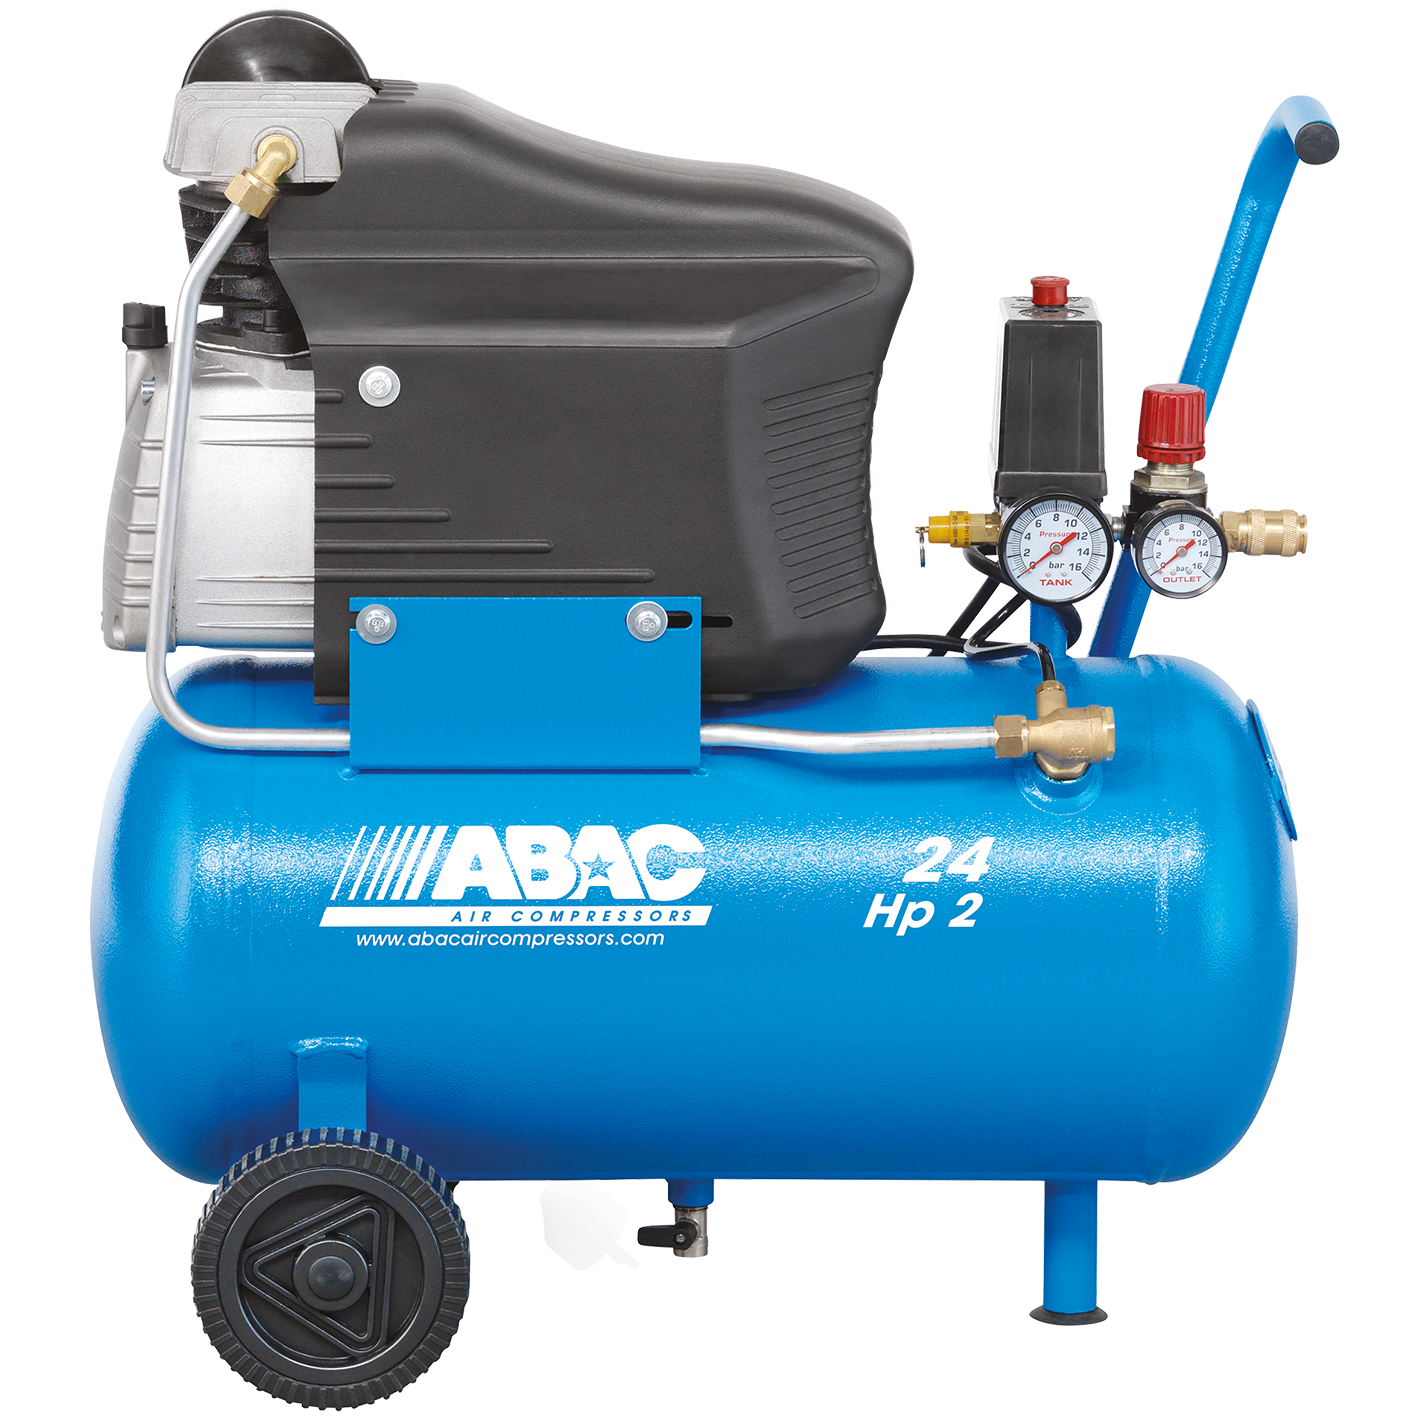 UK's Leading Suppliers of Direct Drive Compressors